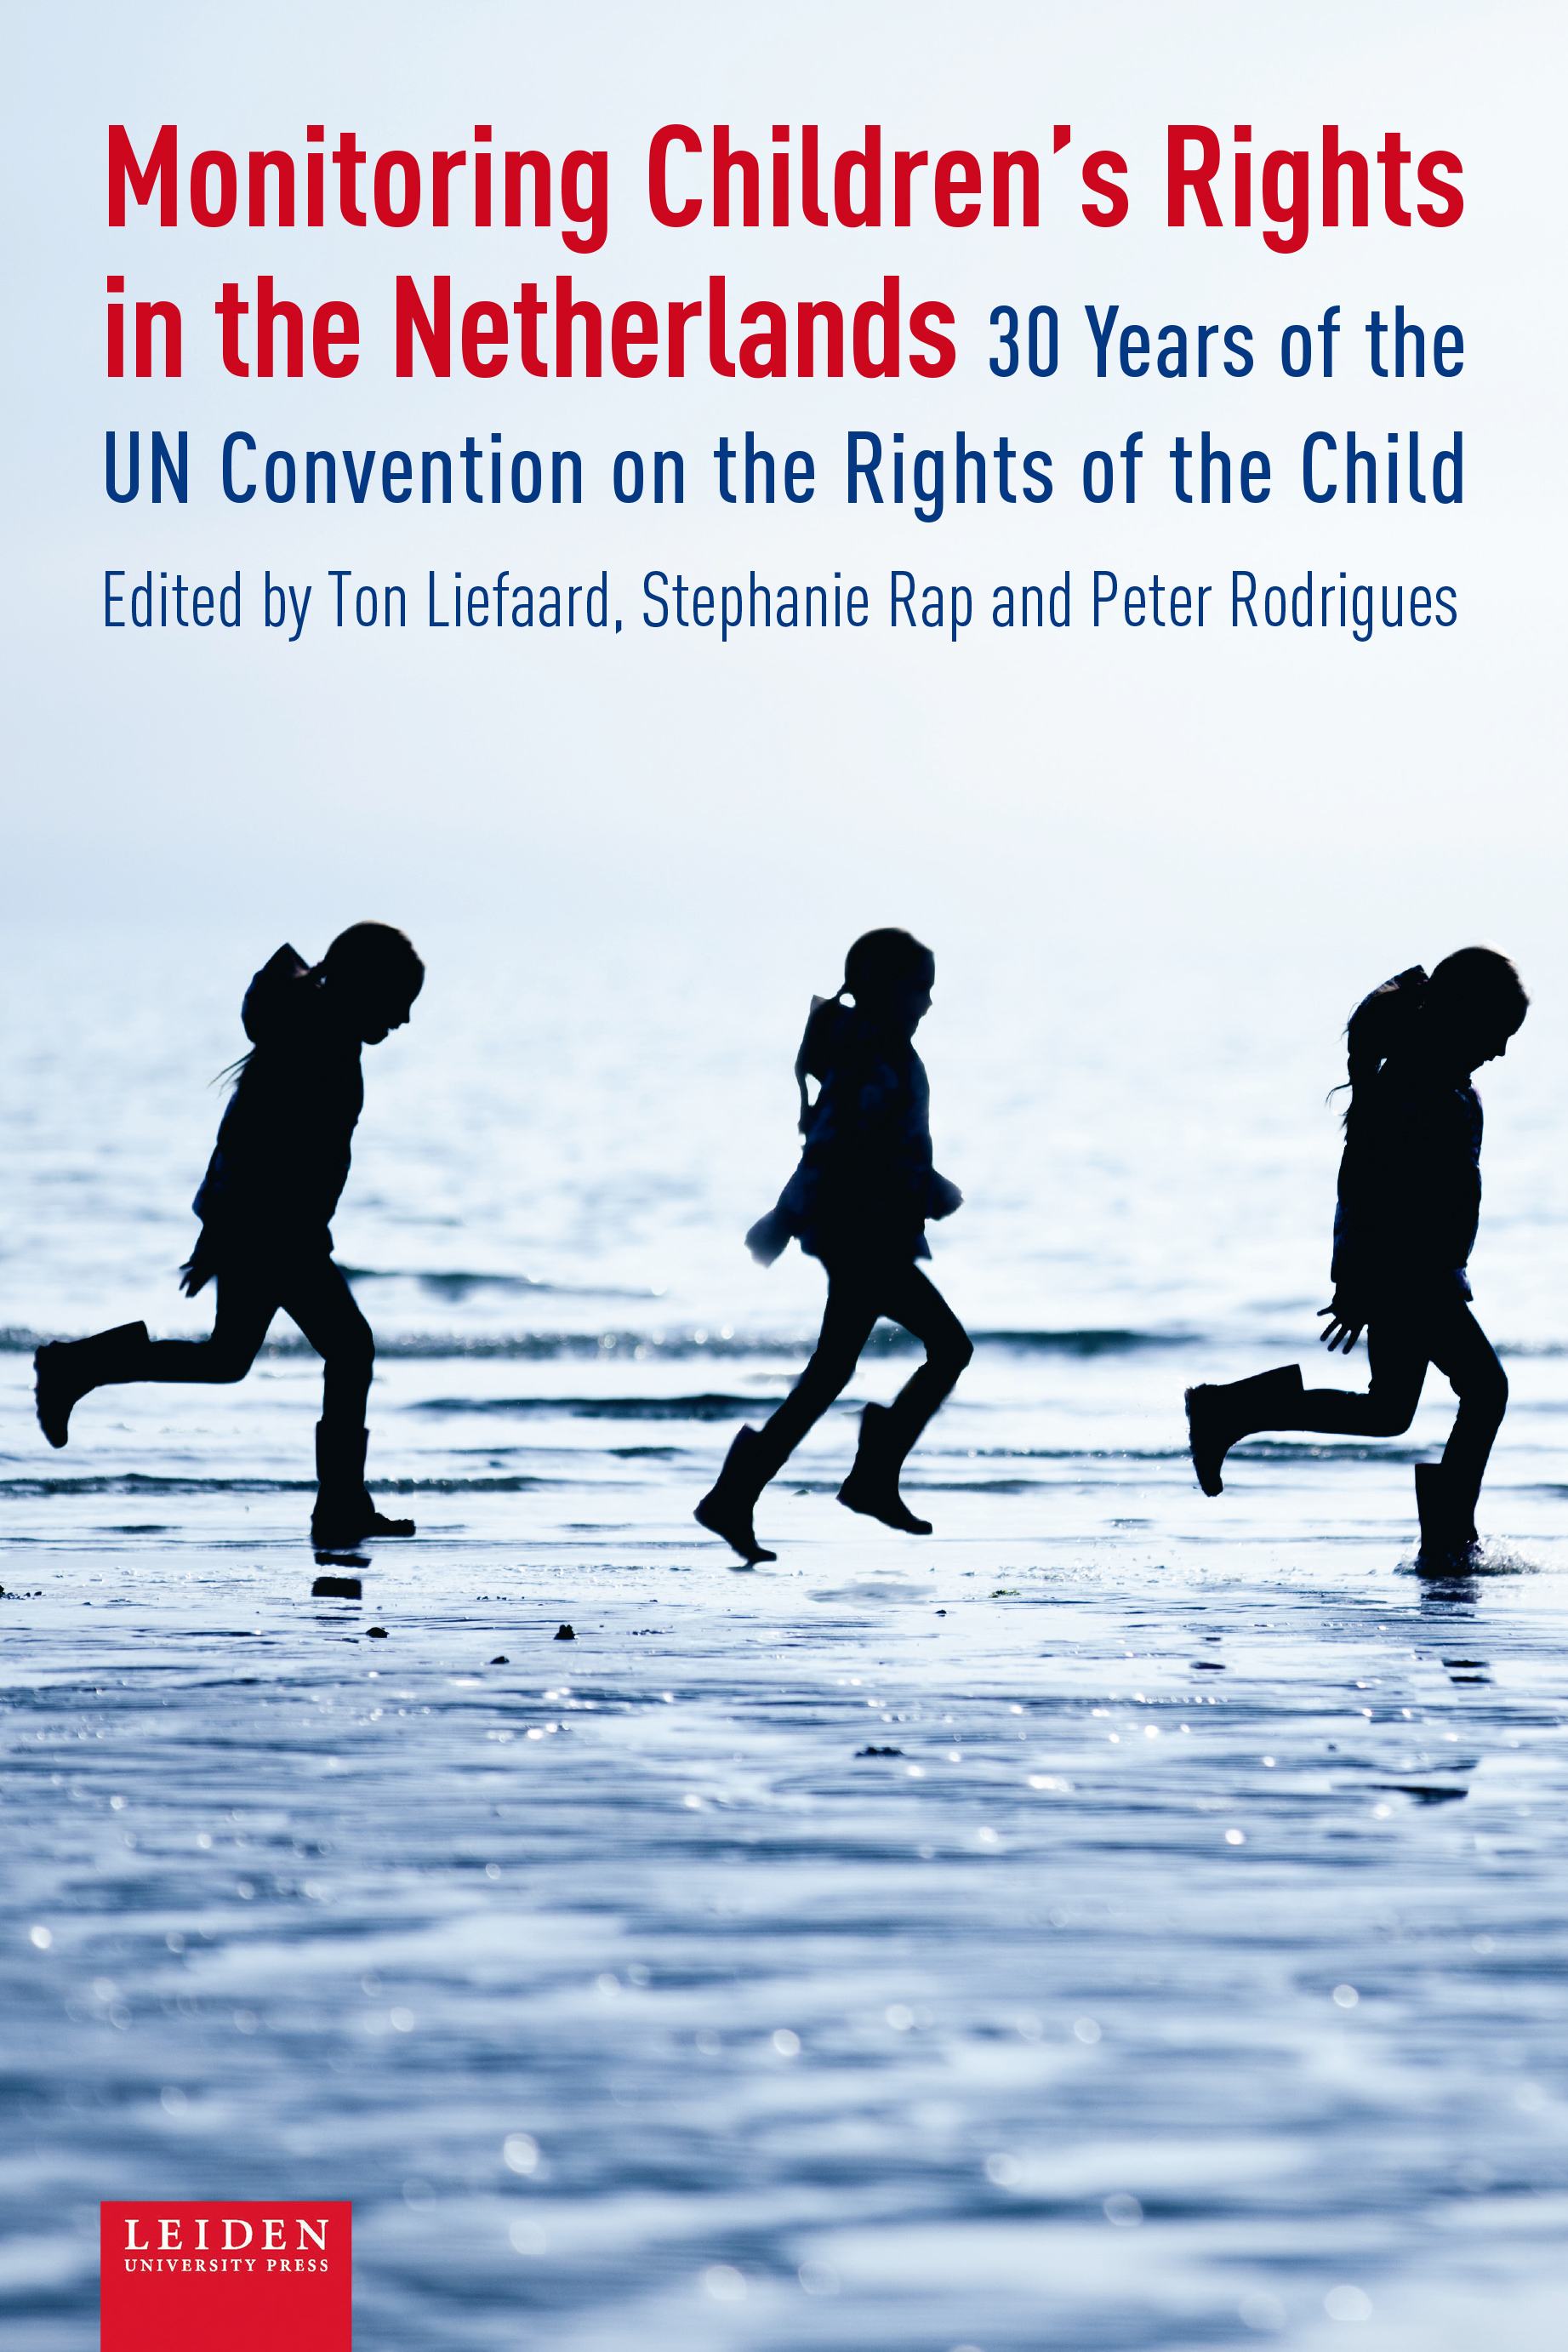 LUP Monitoring Children’s Rights in the Netherlands def